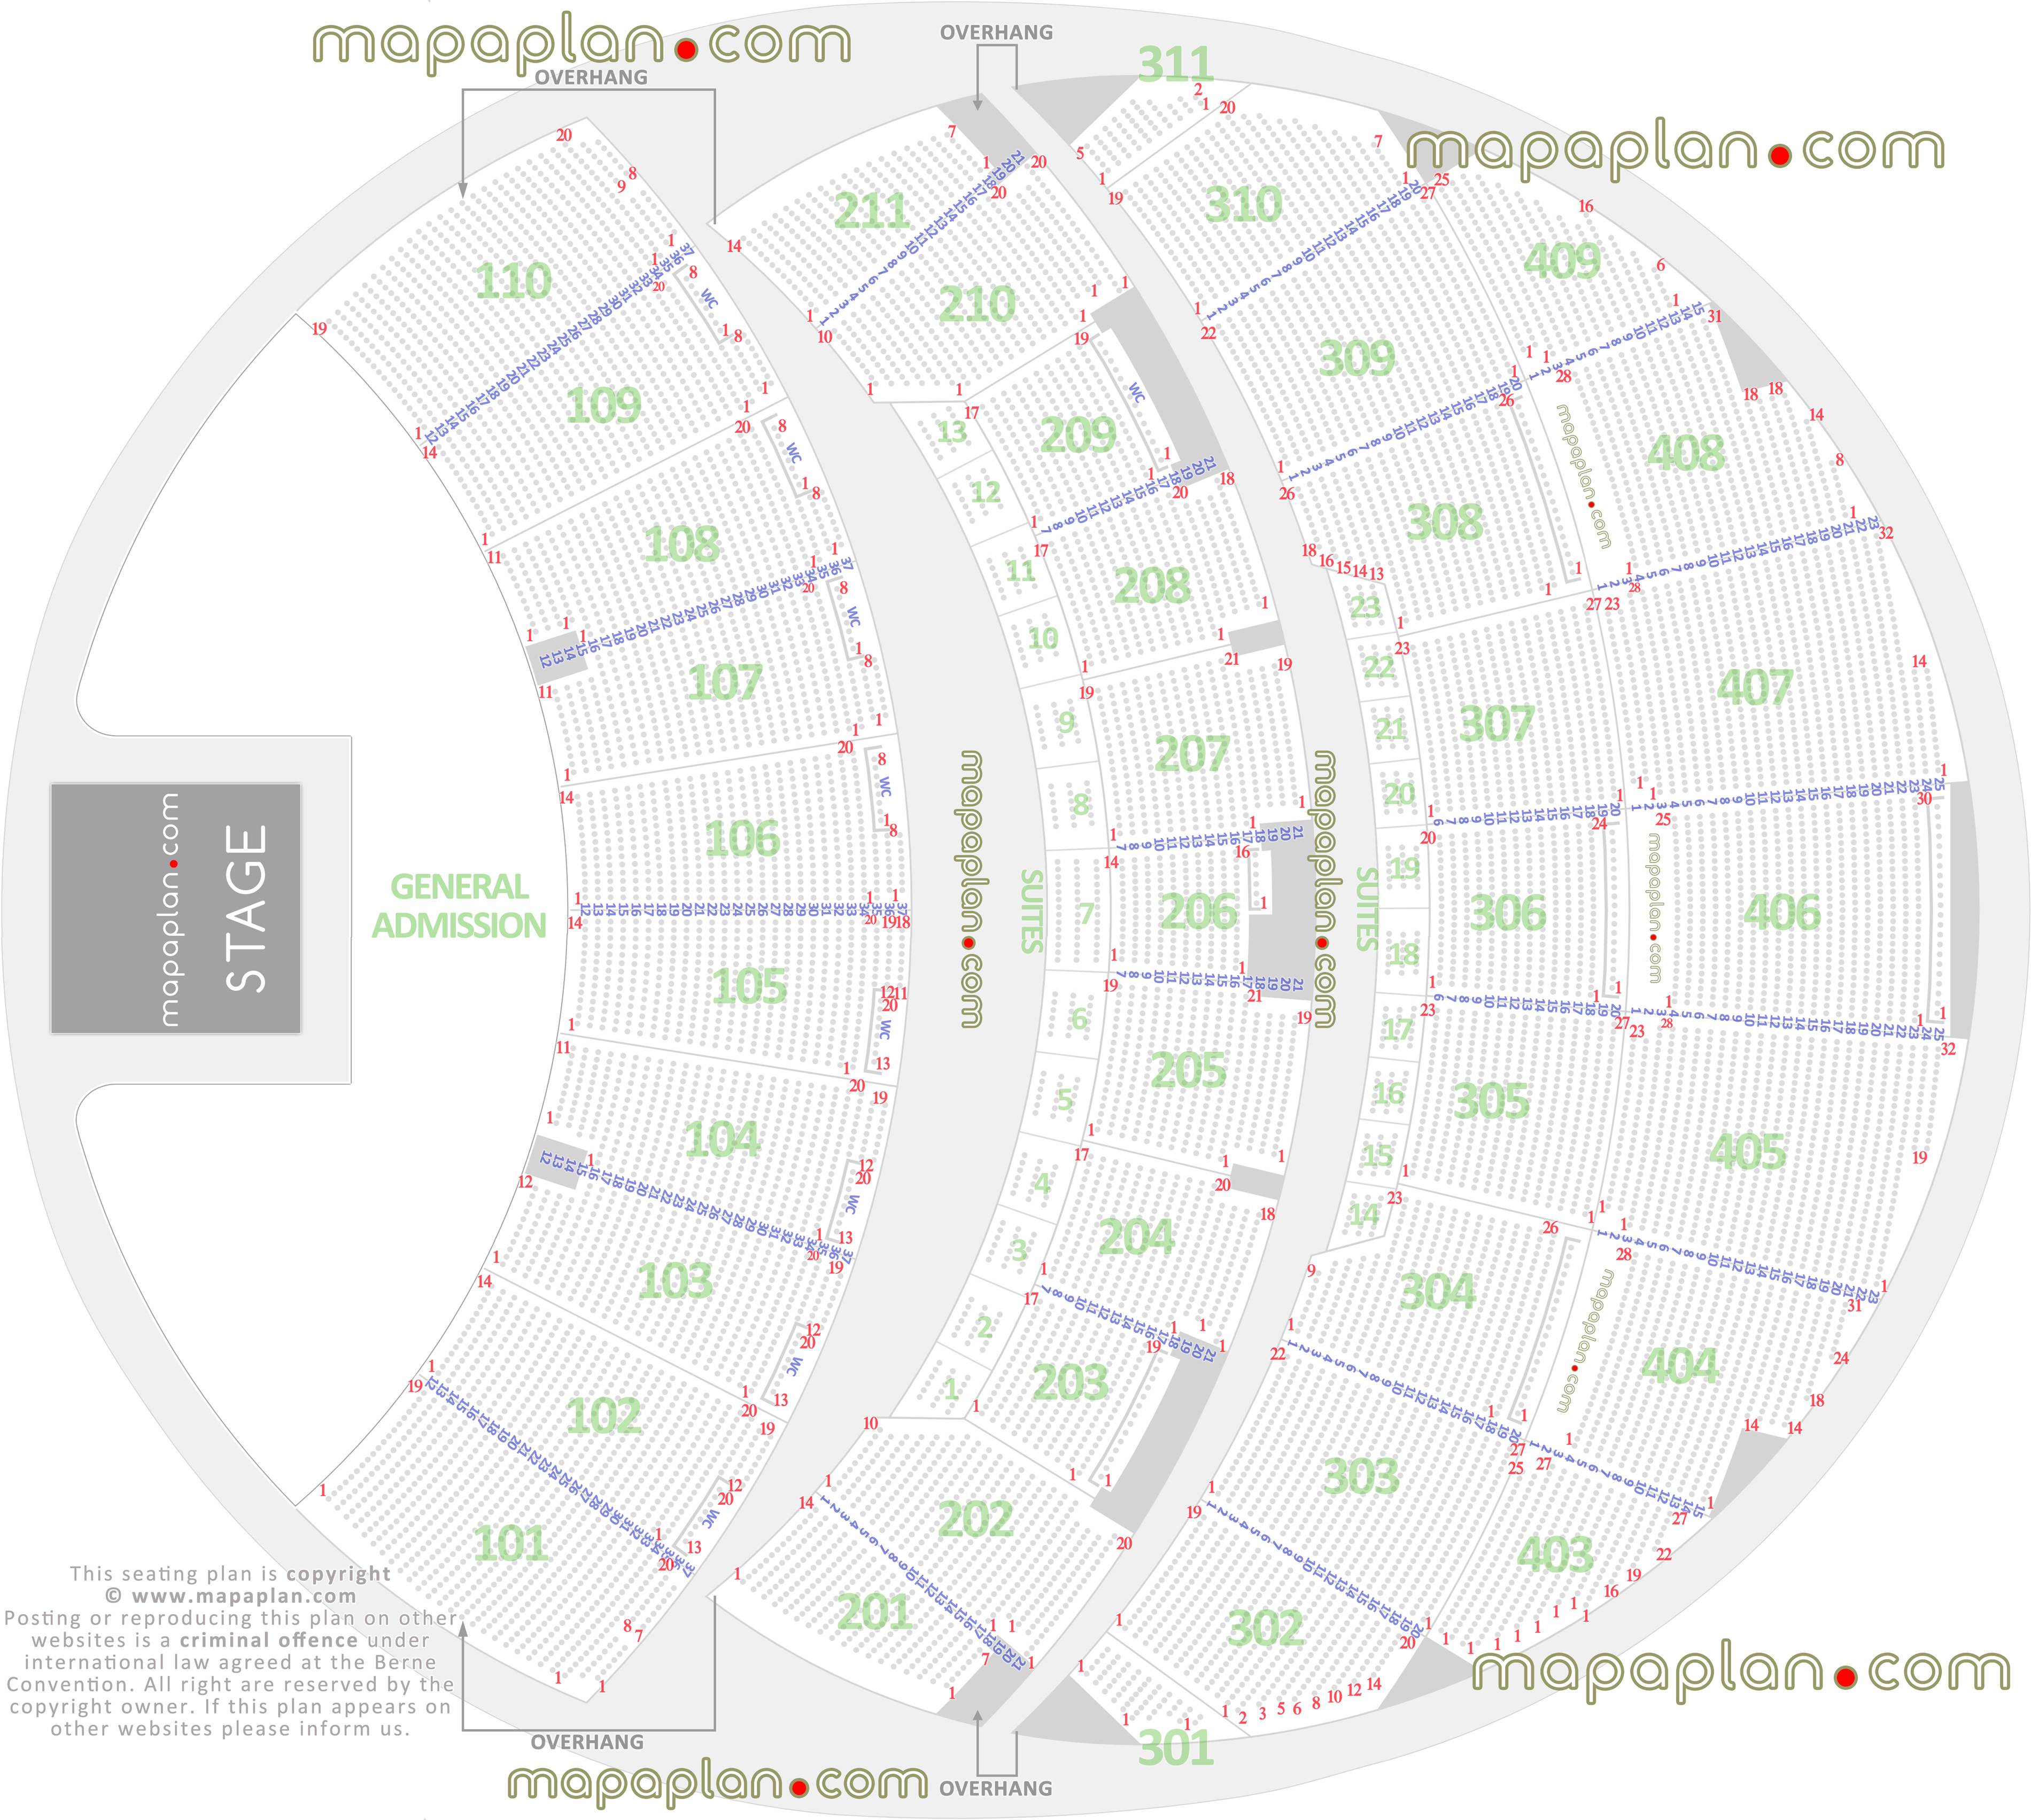 Las Vegas Sphere seating chart detailed seat numbers row numbering concert chart interactive plan layout